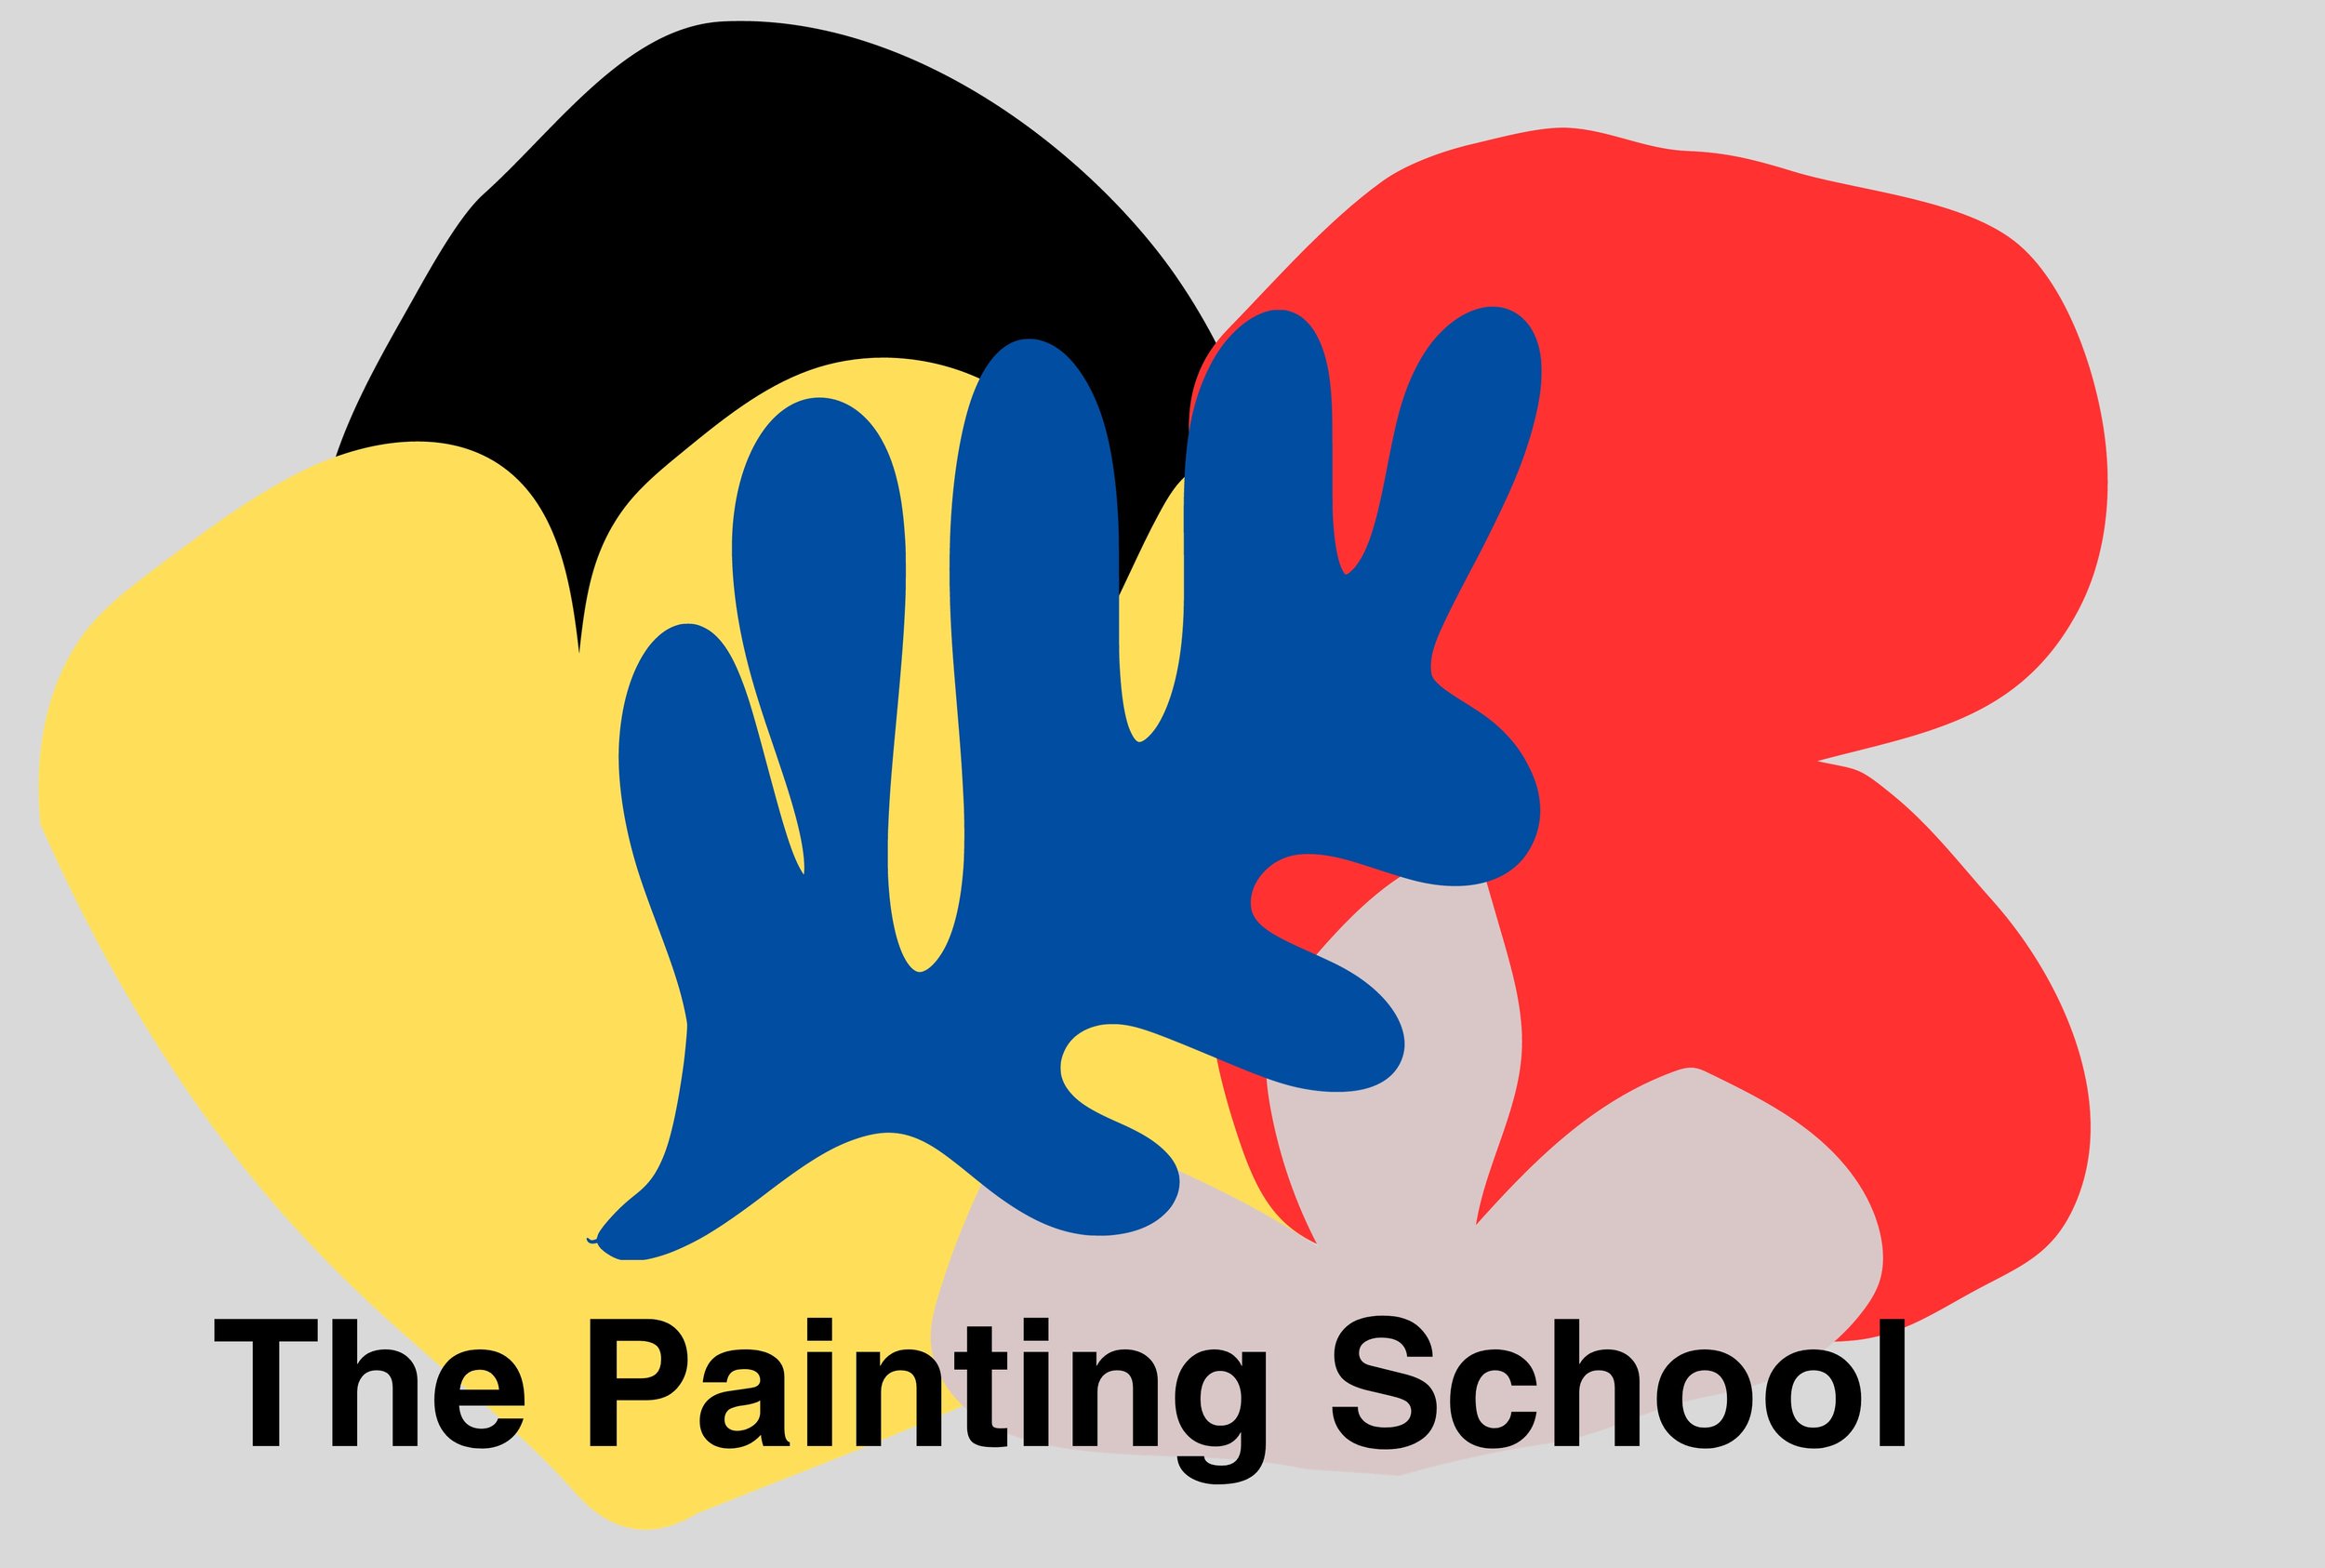 The Painting School